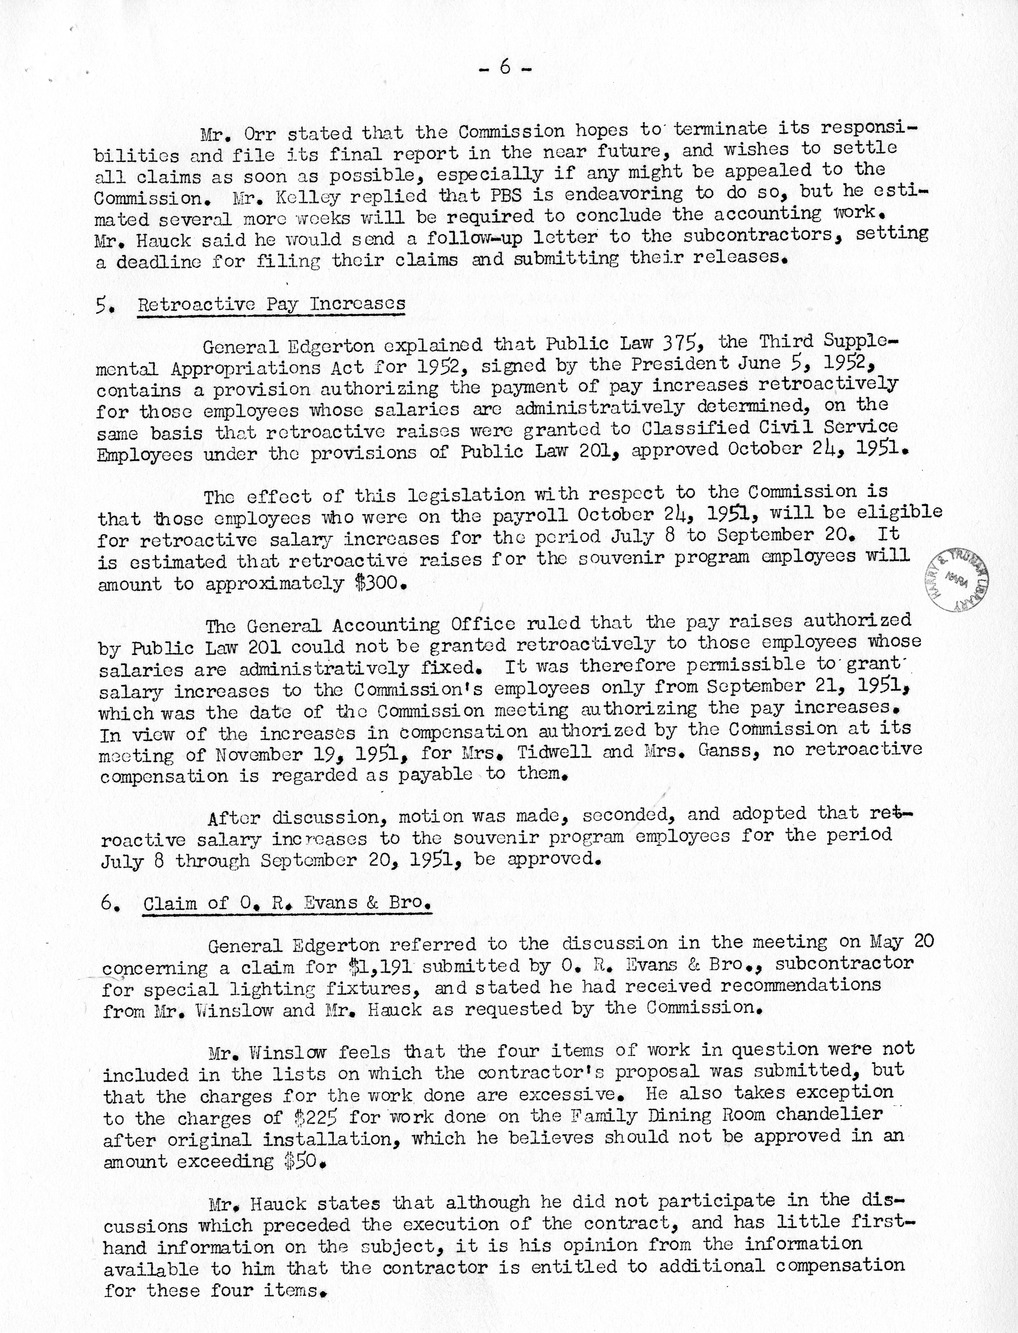 Minutes of the Seventy-First Meeting of the Commission On Renovation of the Executive Mansion